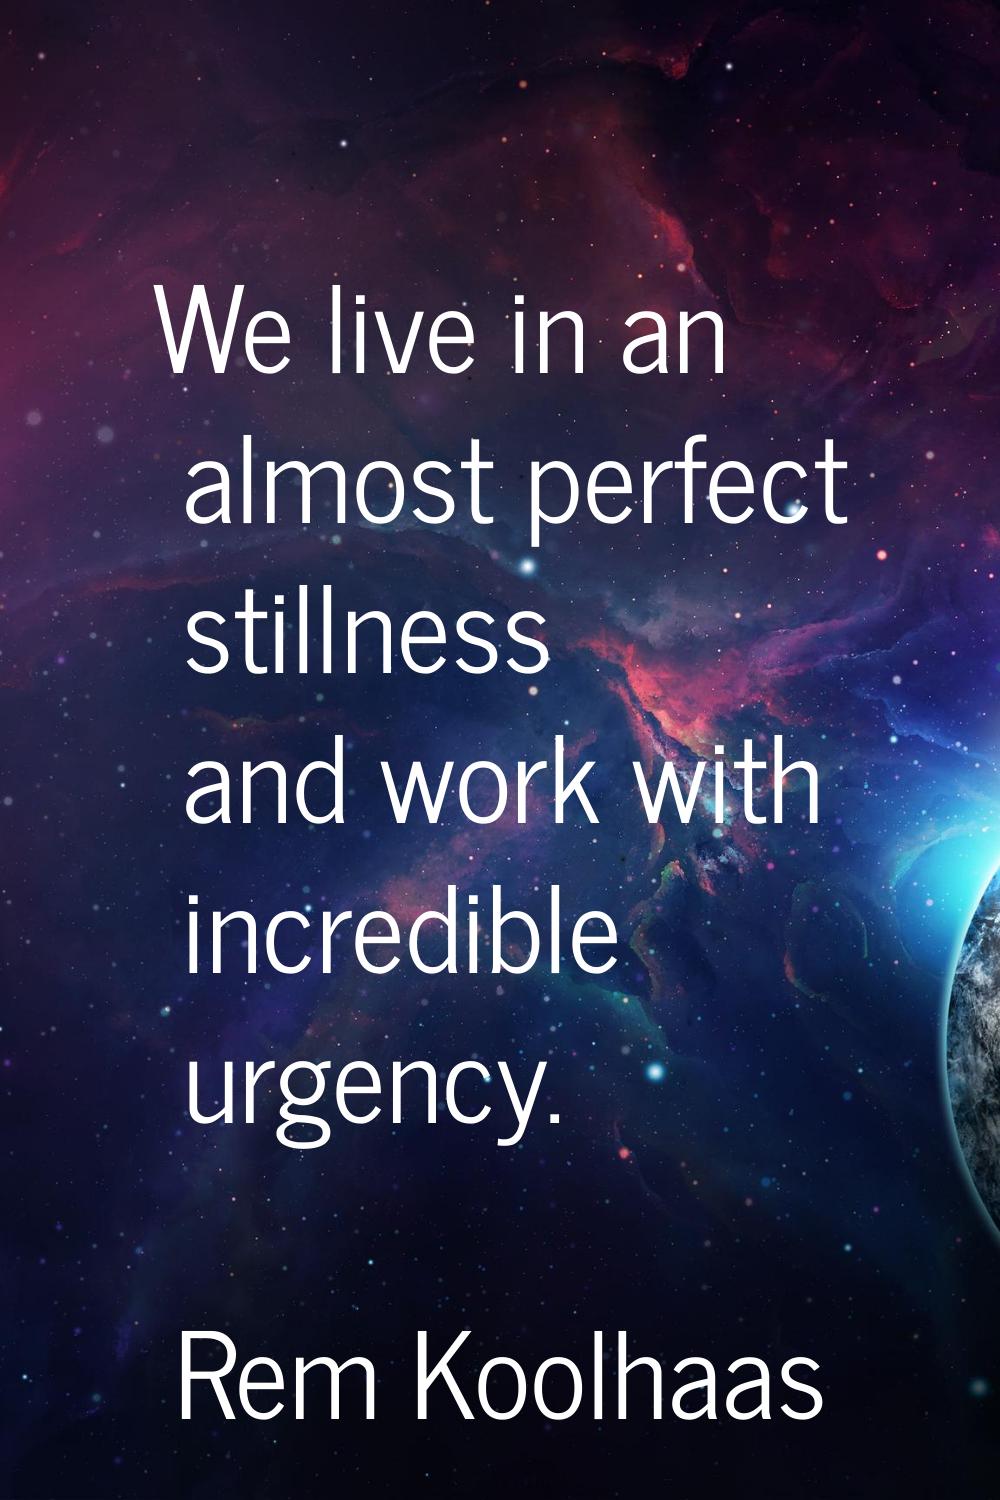 We live in an almost perfect stillness and work with incredible urgency.